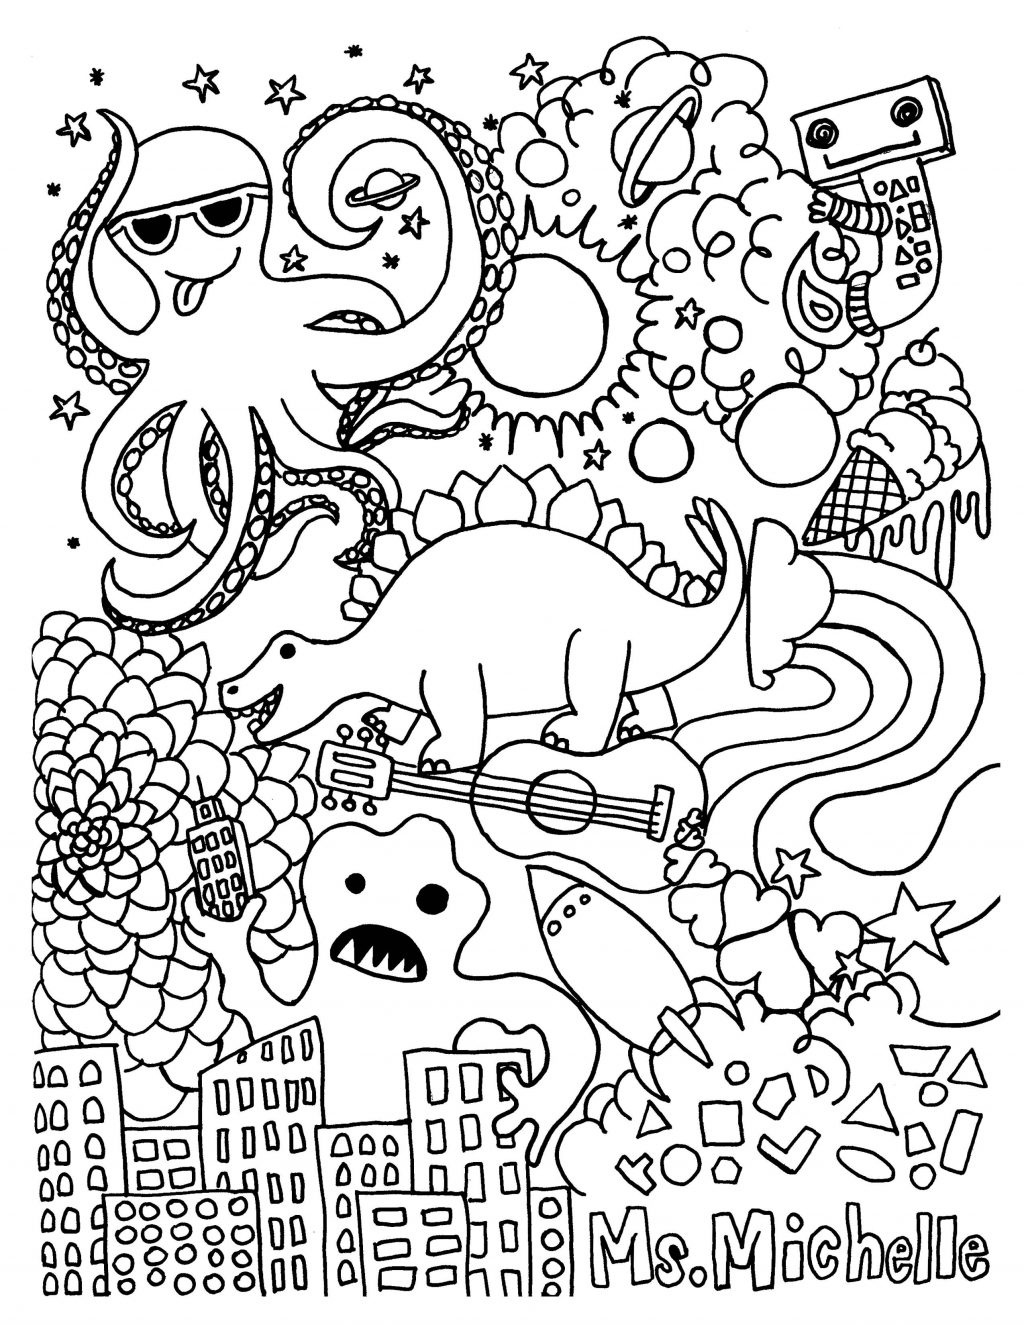 Coloring Page ~ Inspirational Free Printable Coloring Pages For Year - Free Printable Coloring Pages For 2 Year Olds